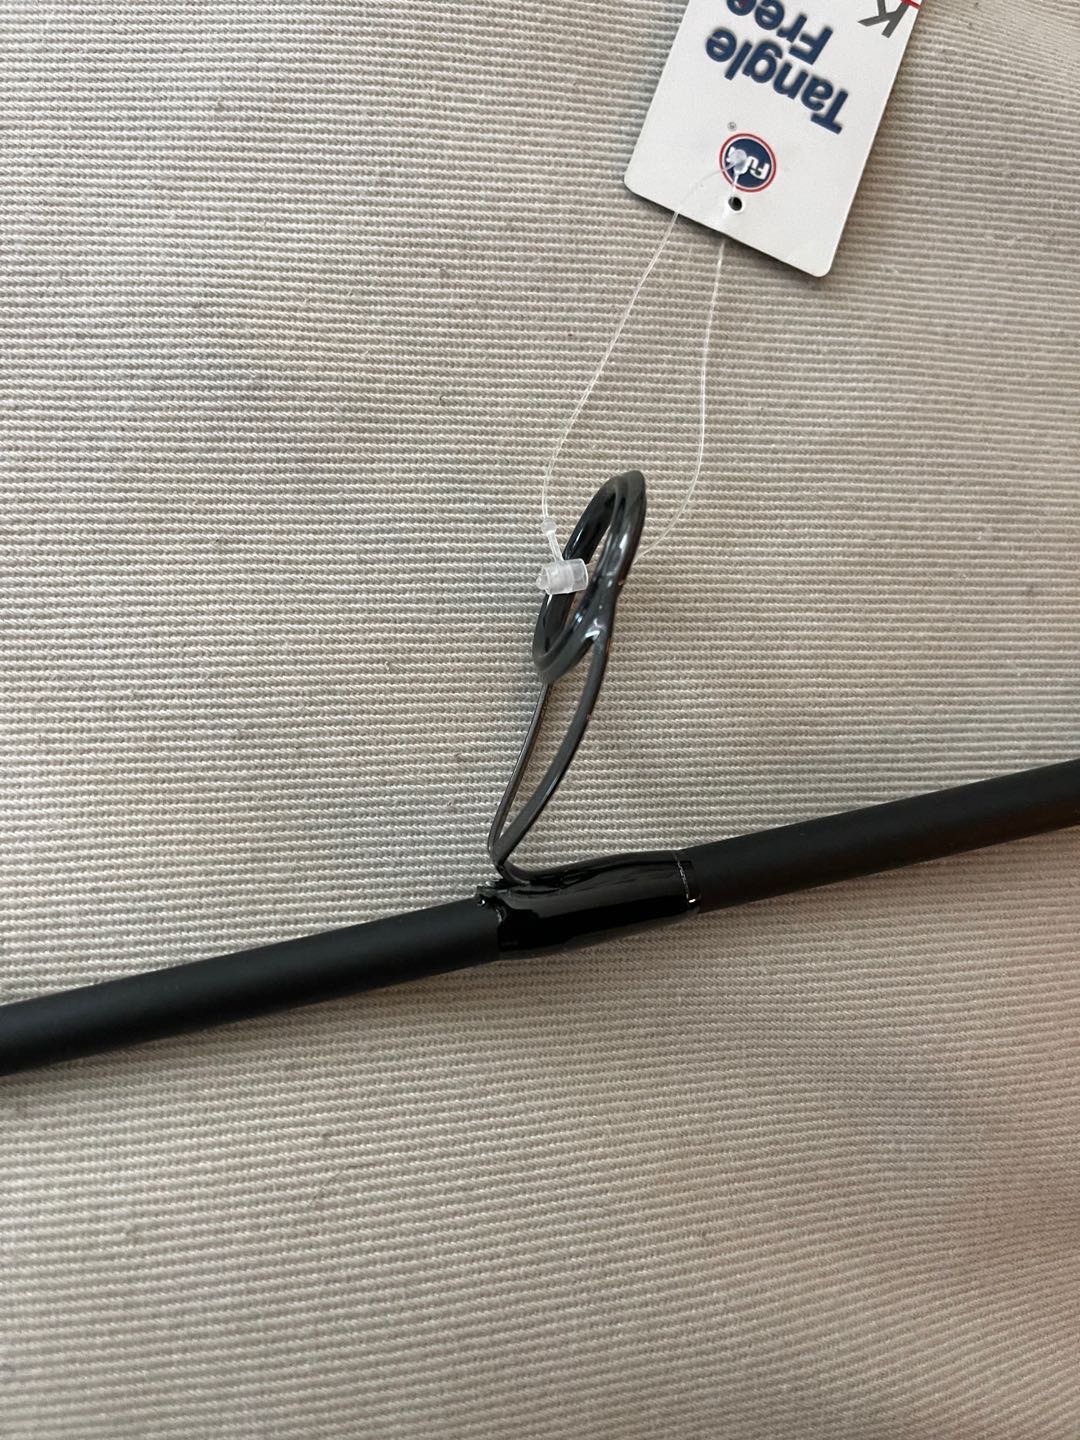 How to fix a bent guide and cracked epoxy - Rod Building and Custom Rods -  Bass Fishing Forums